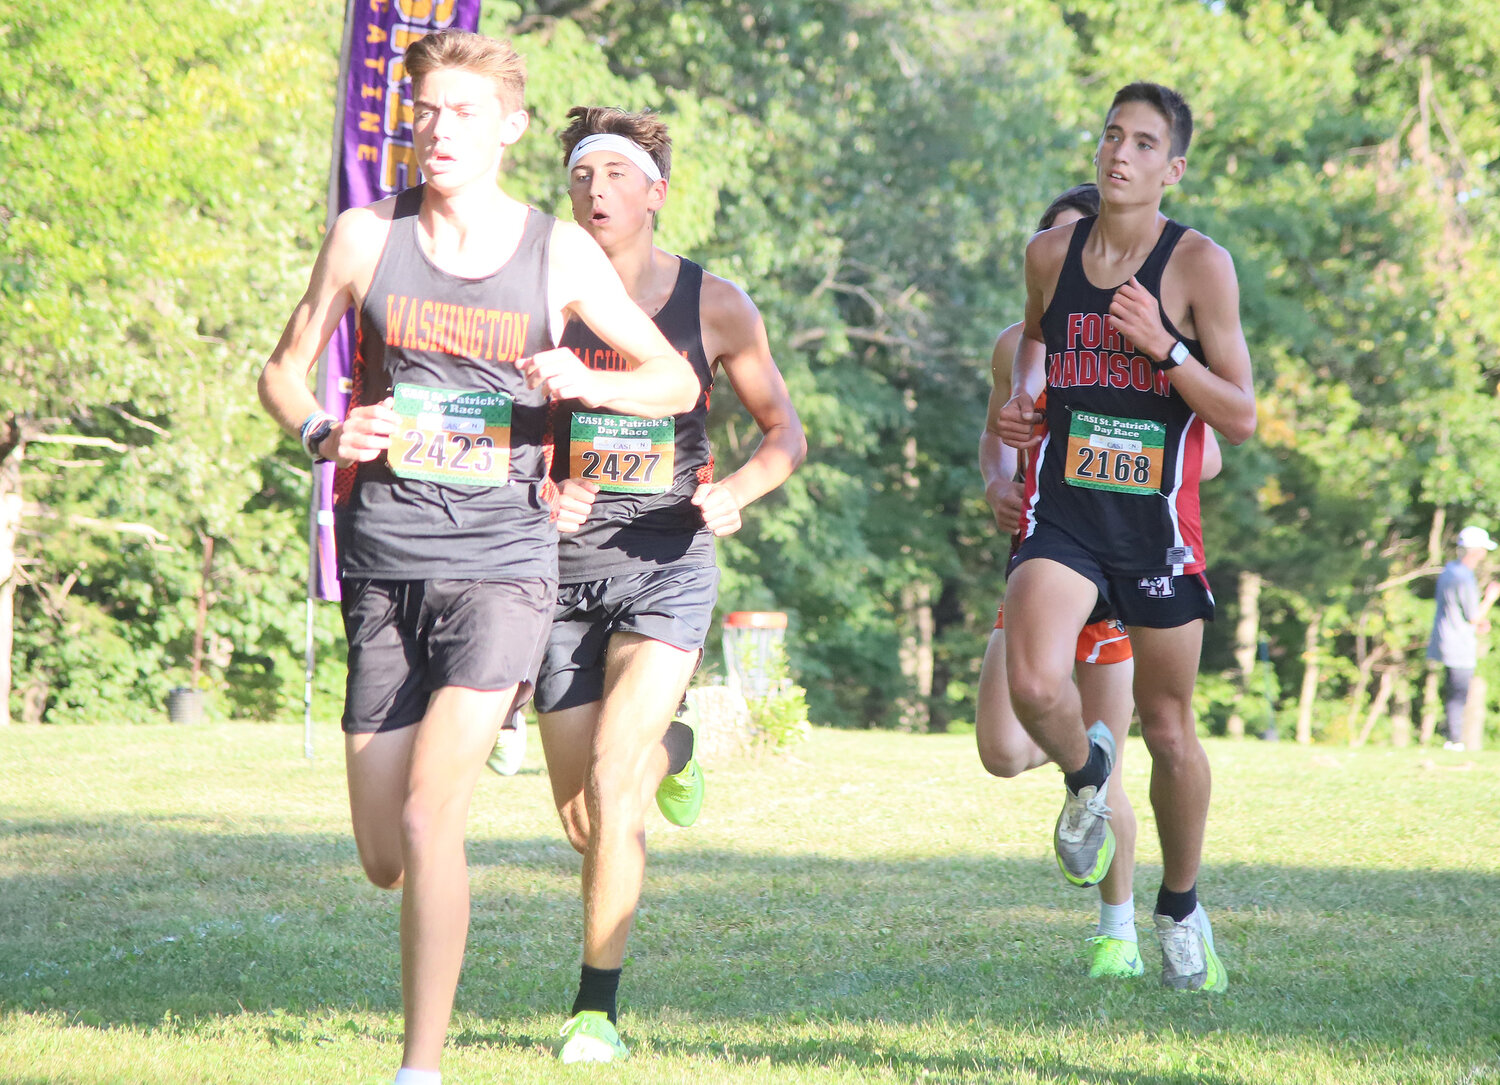 Fort Madison's Nolan Guzman works his way up the group about 3/4 of the way through the boys' Varsity A run at the Timm Lamb Invitational Thursday in Fort Madison.